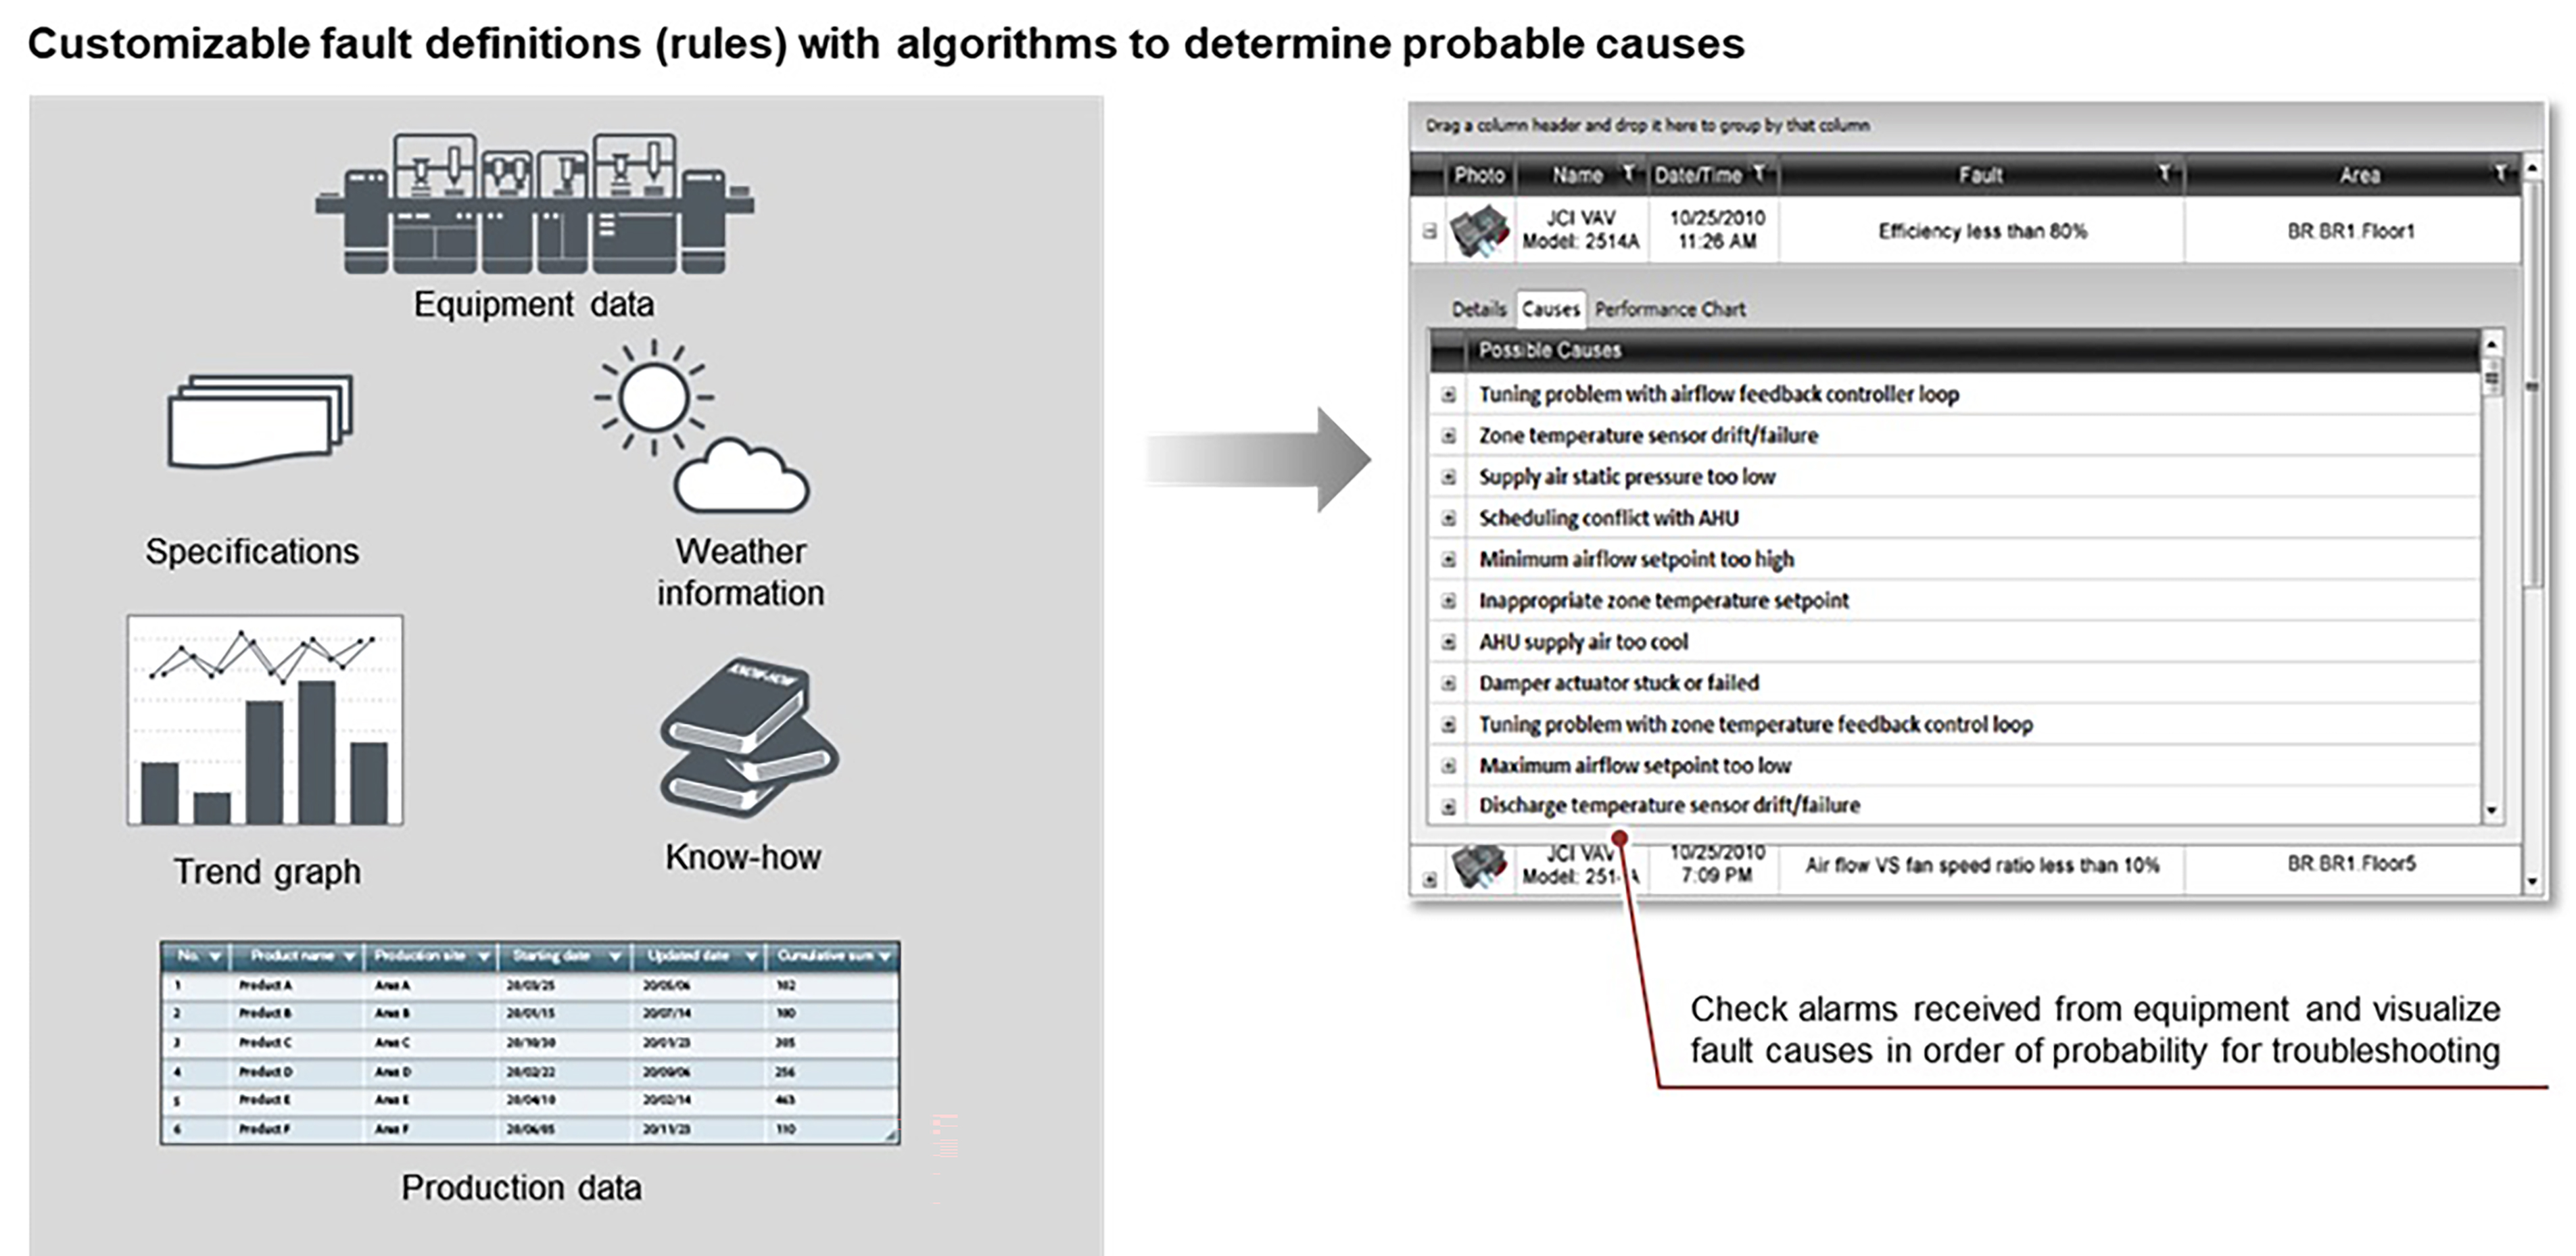 SCADA systems can be used to list-up potential fault causes in order of probability to make troubleshooting tasks easier - this example is from a GENESIS64 solution. [Source: Mitsubishi Electric Corporation, Japan]